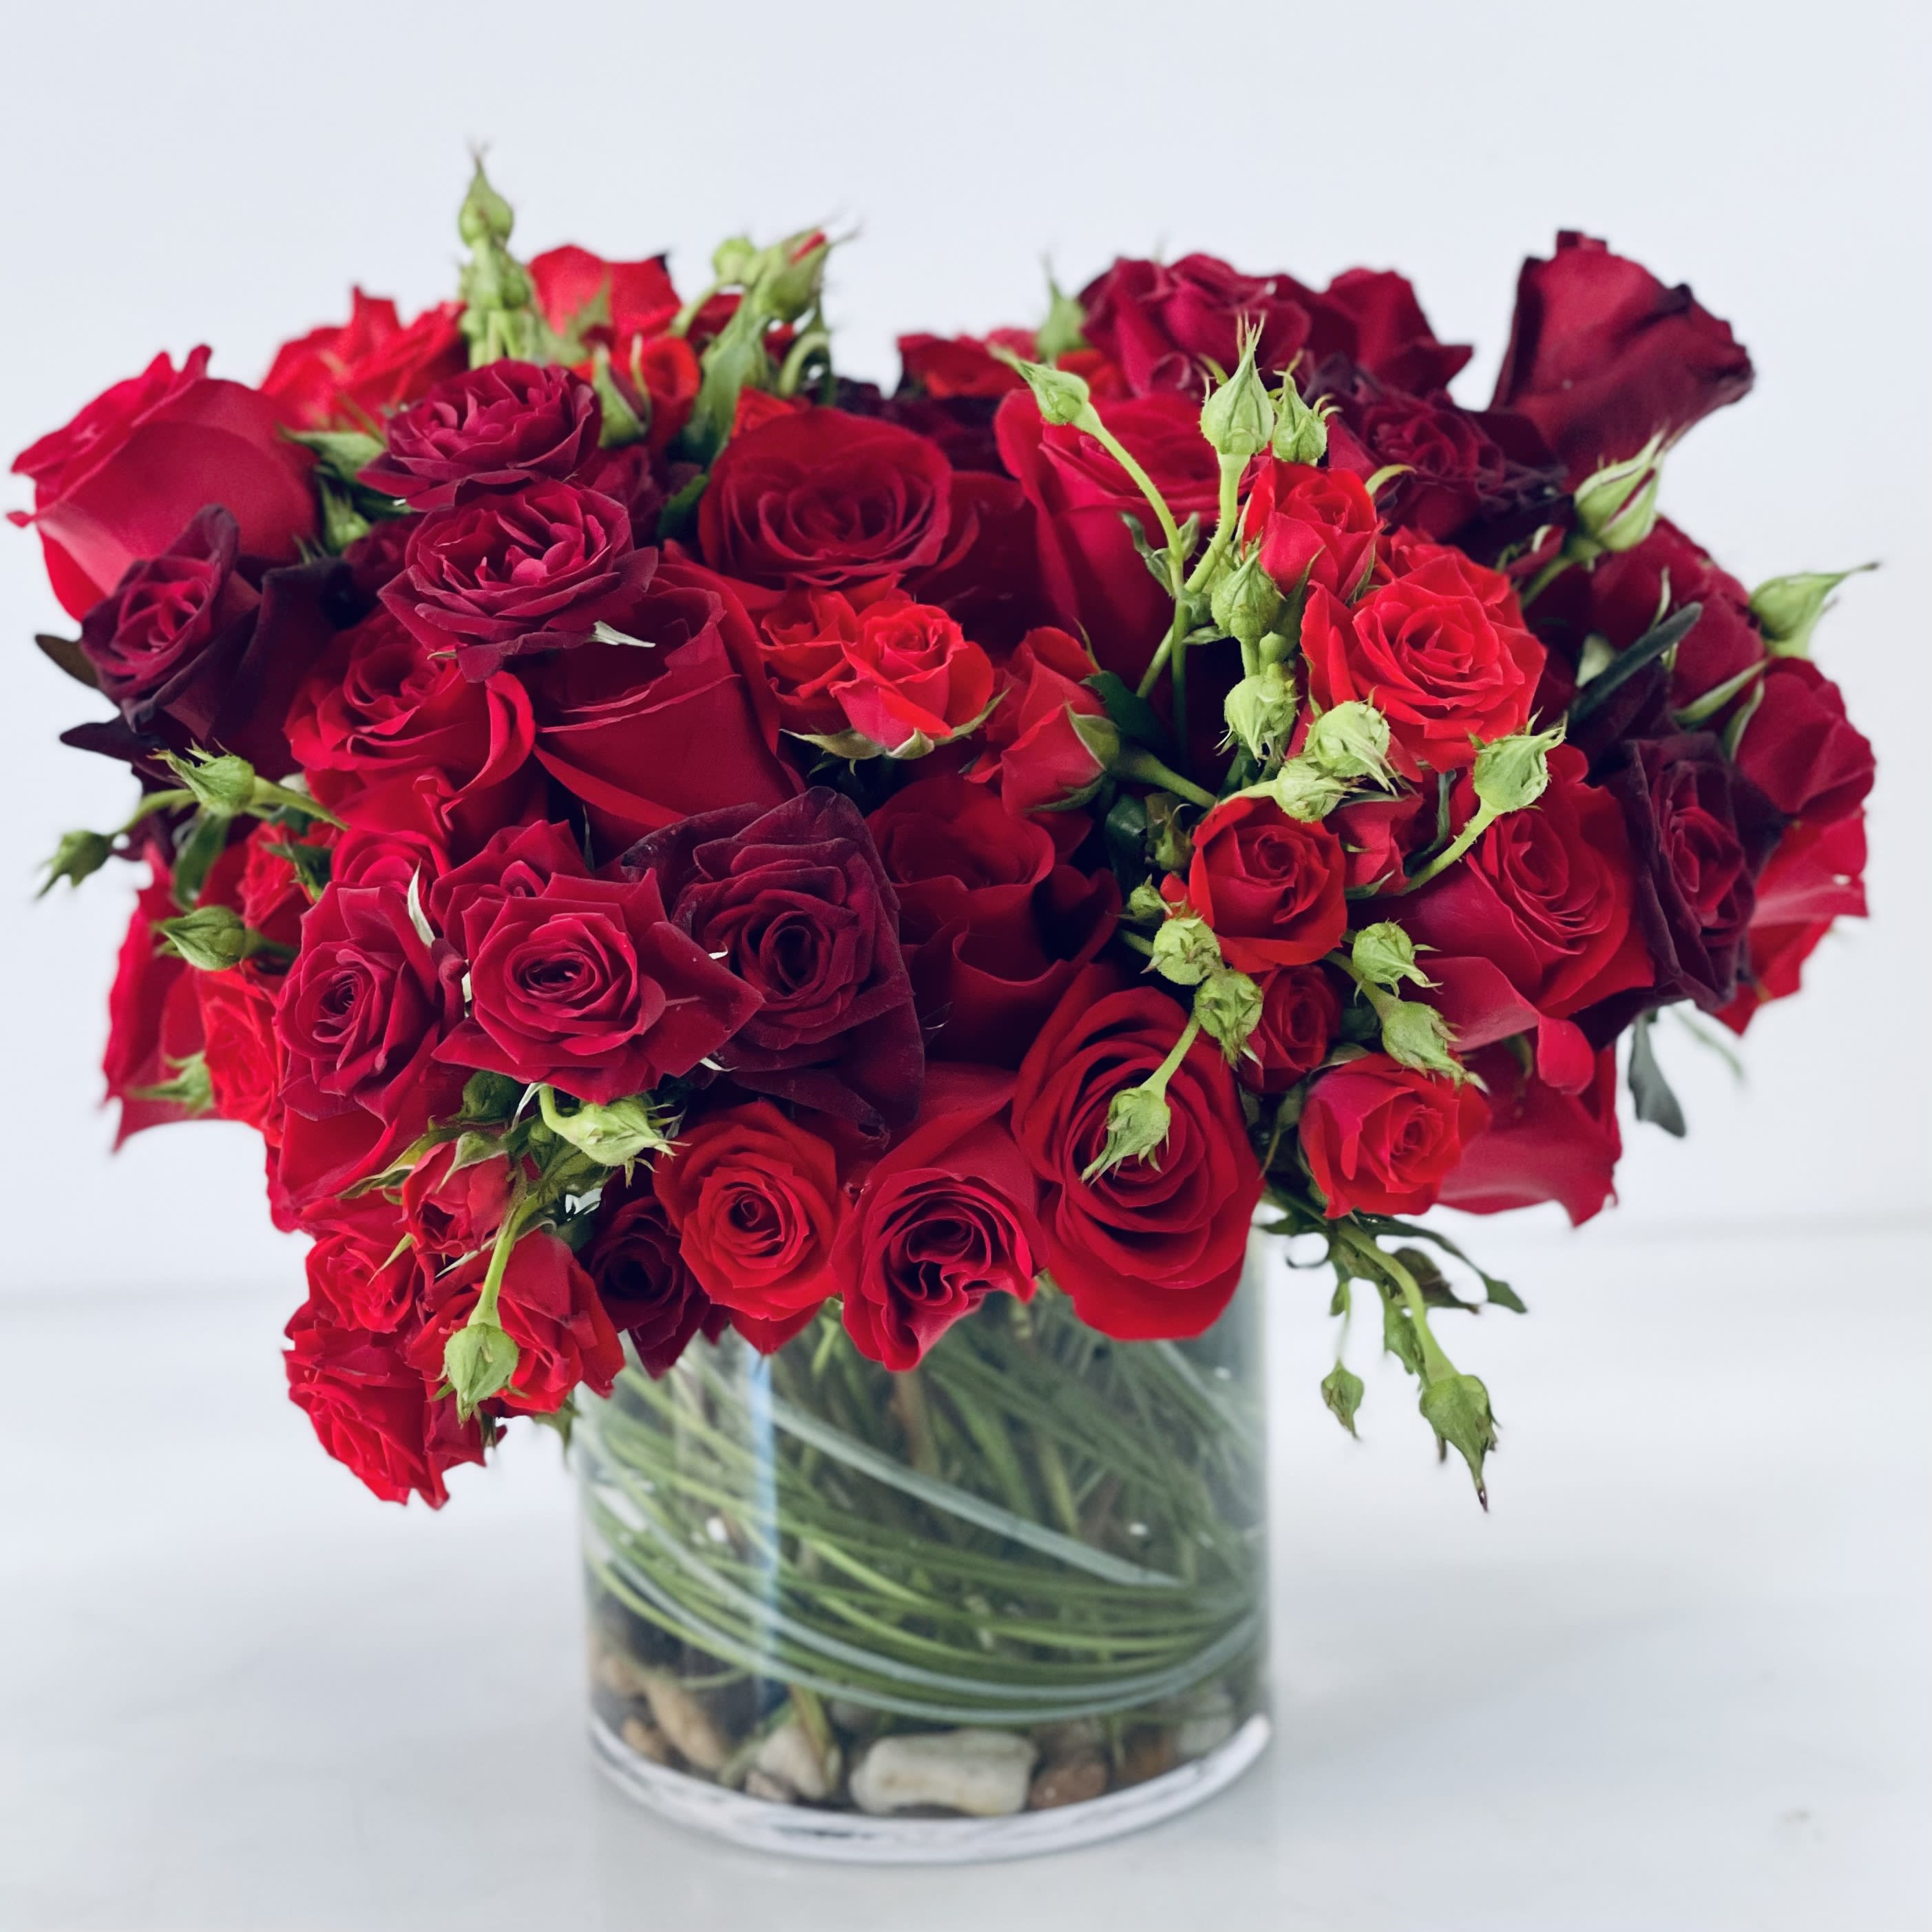 Rosalicious  - Reds and more reds over 50 blooms 